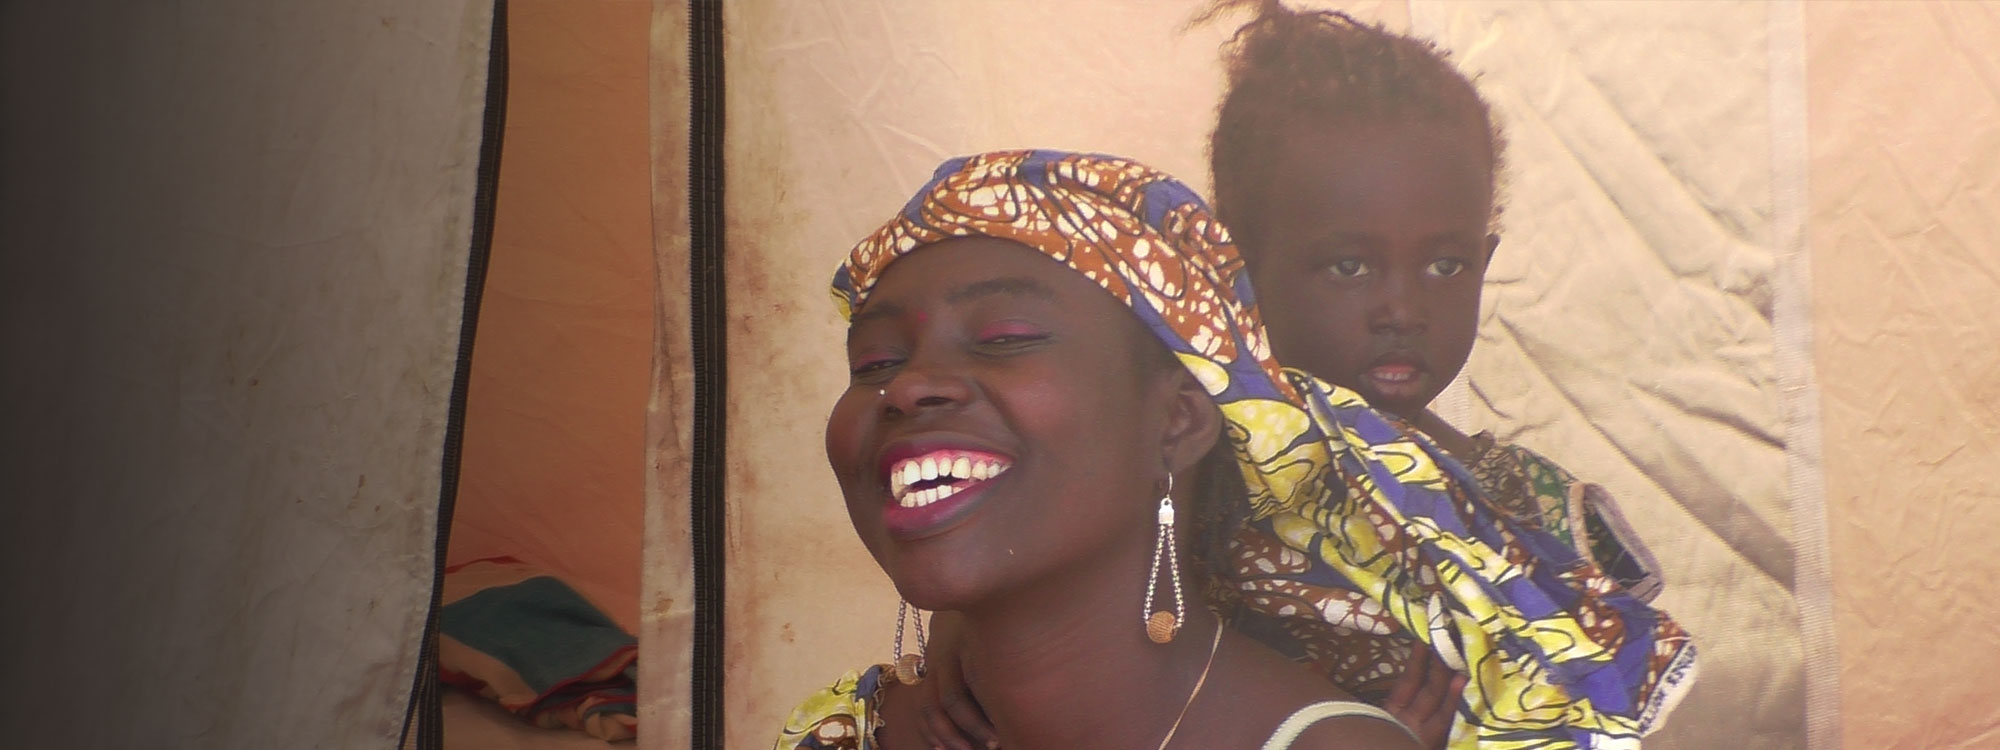 Cameroon - woman in headscarf smiling with child standing behind her